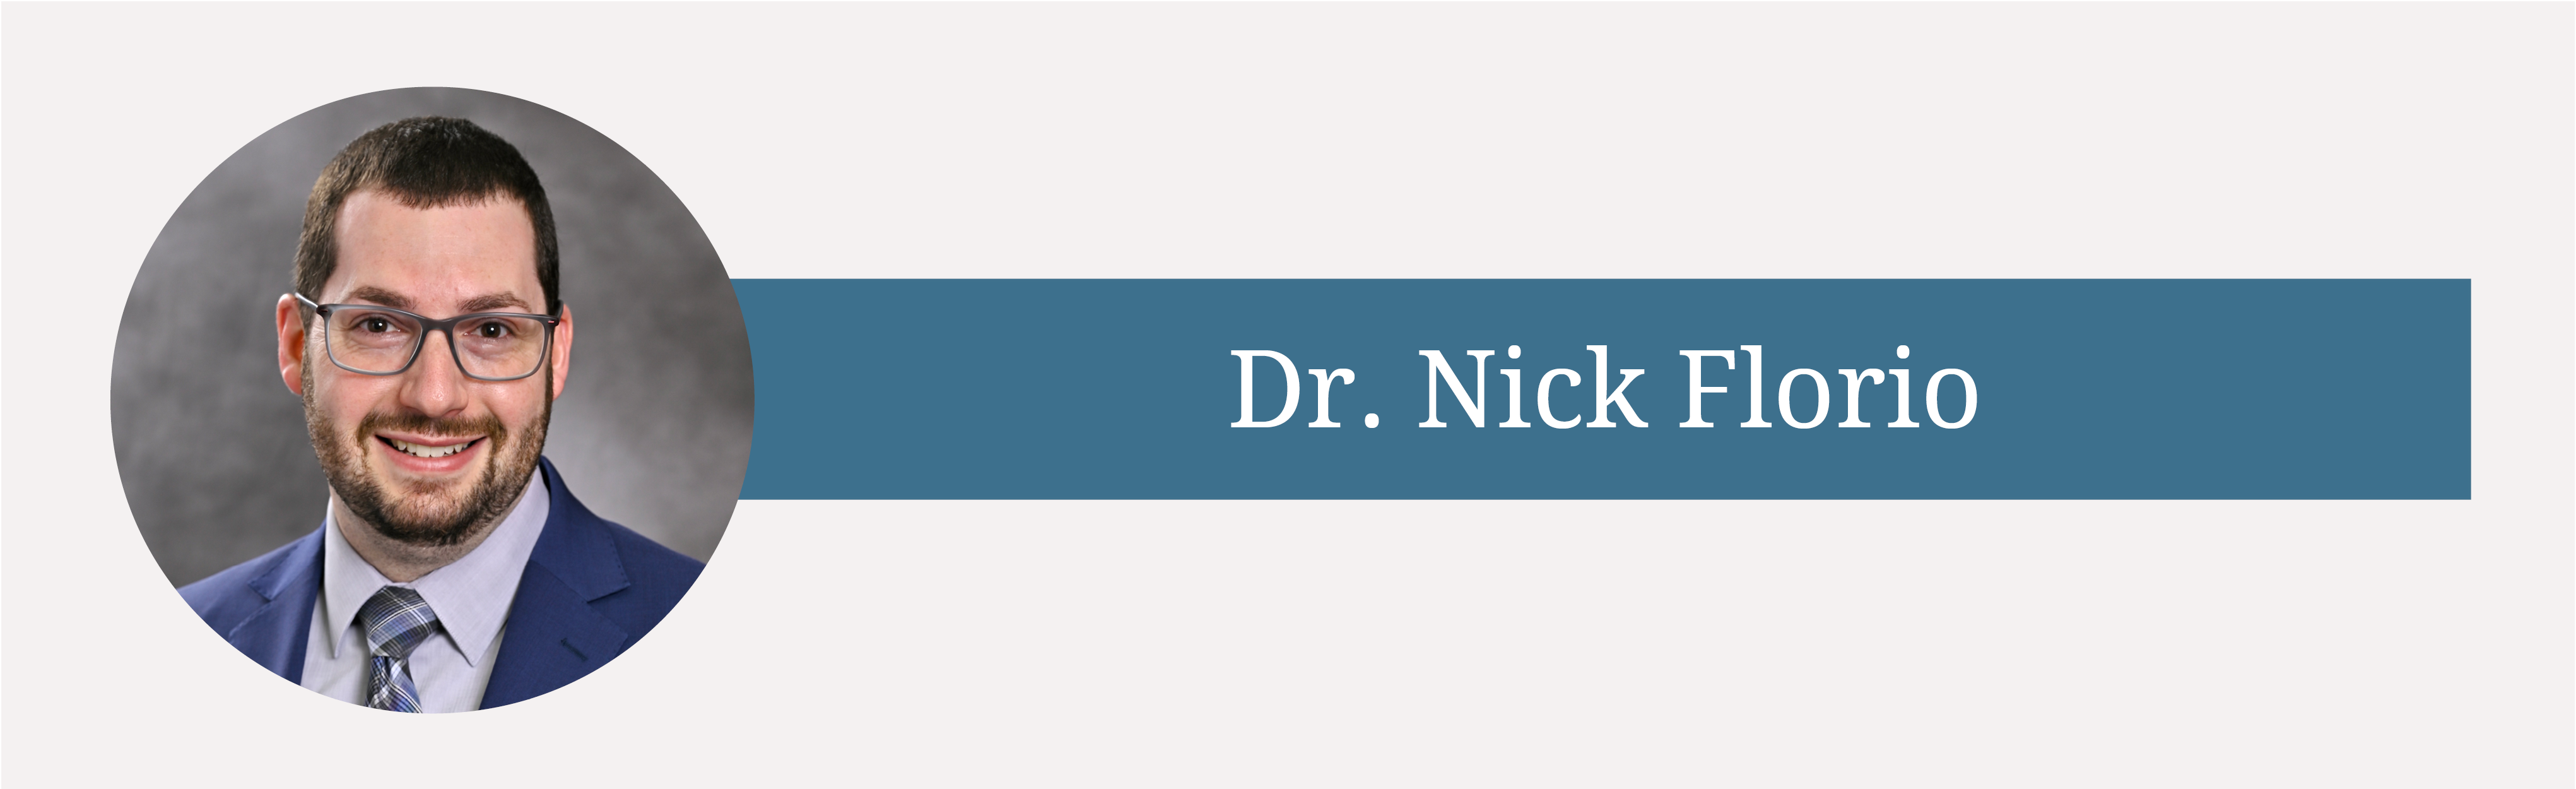 Family Physician Dr. Nick Florio Joins White Plains Hospital Physician Associates of Yorktown Heights